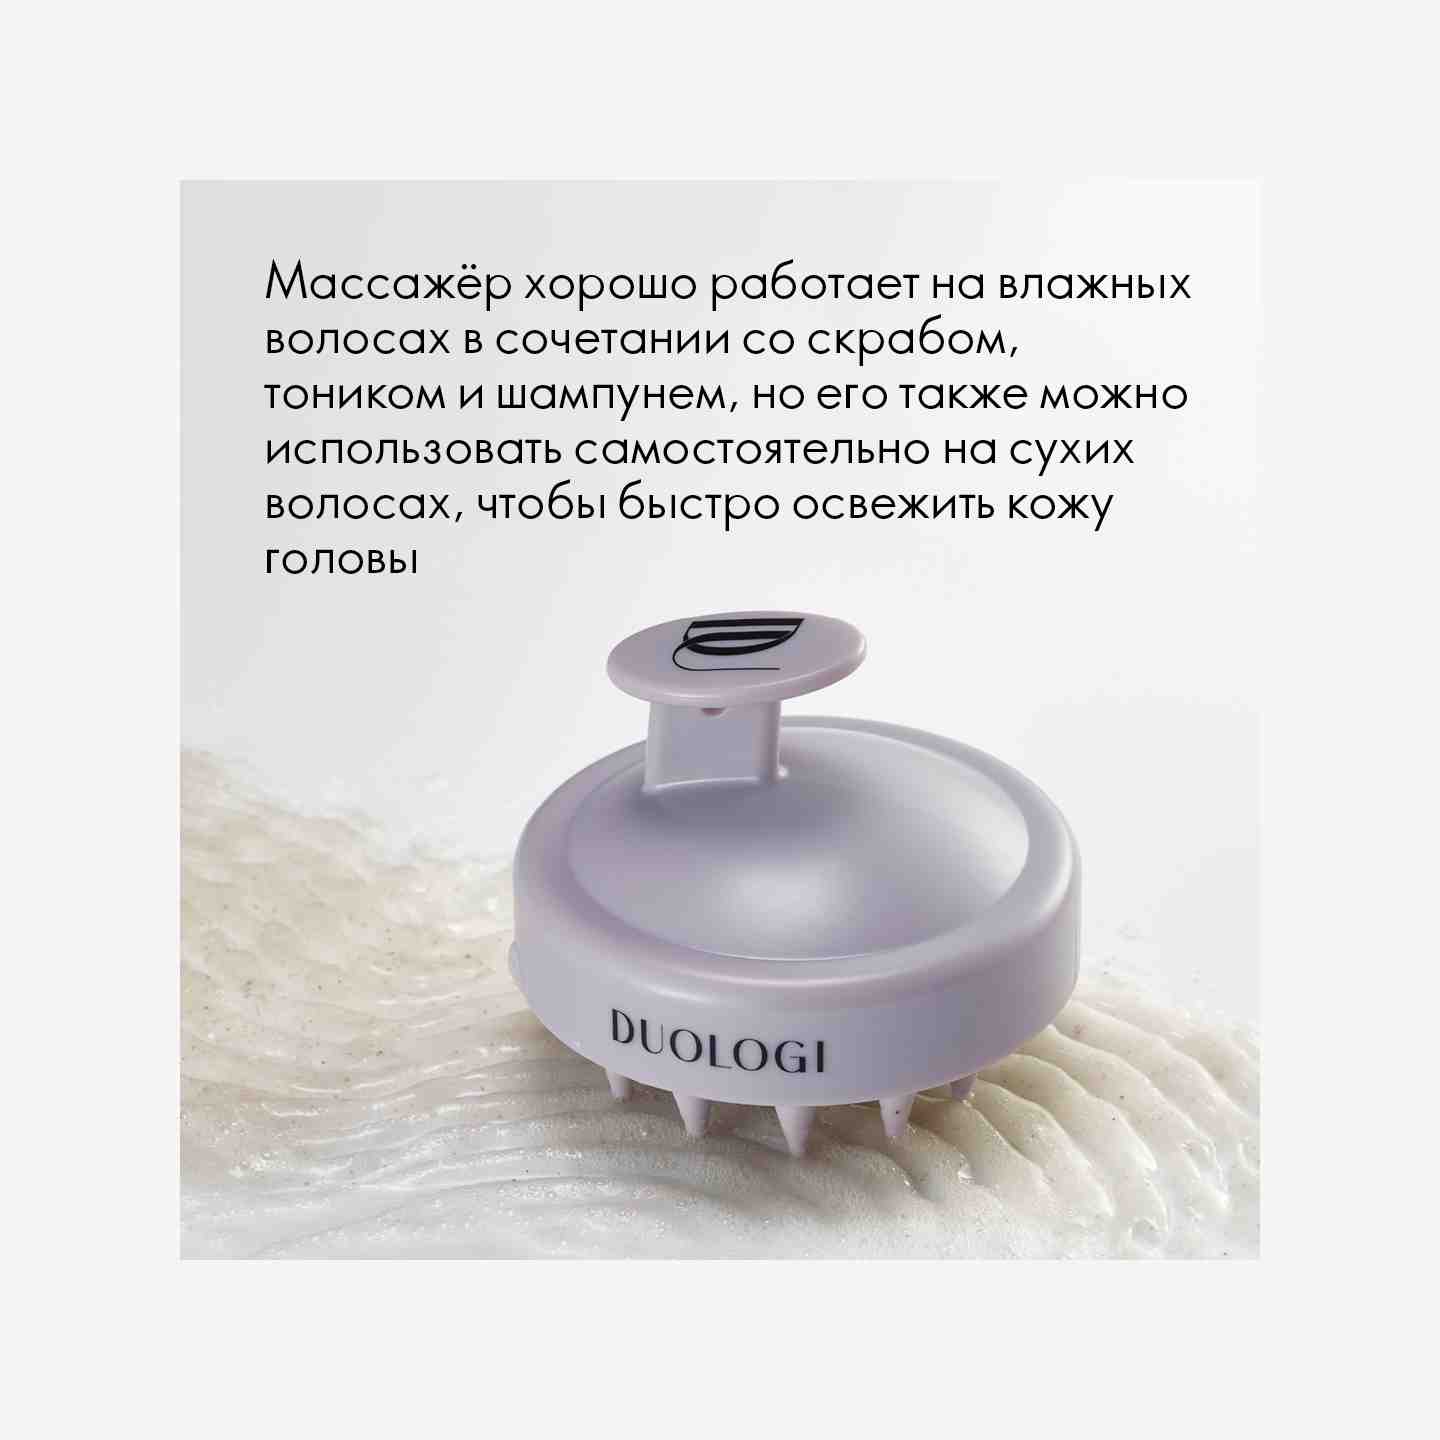 https://media-cdn.oriflame.com/productImage?externalMediaId=product-management-media%2fProducts%2f46492%2fRU%2f46492_2.png&id=17822215&version=1